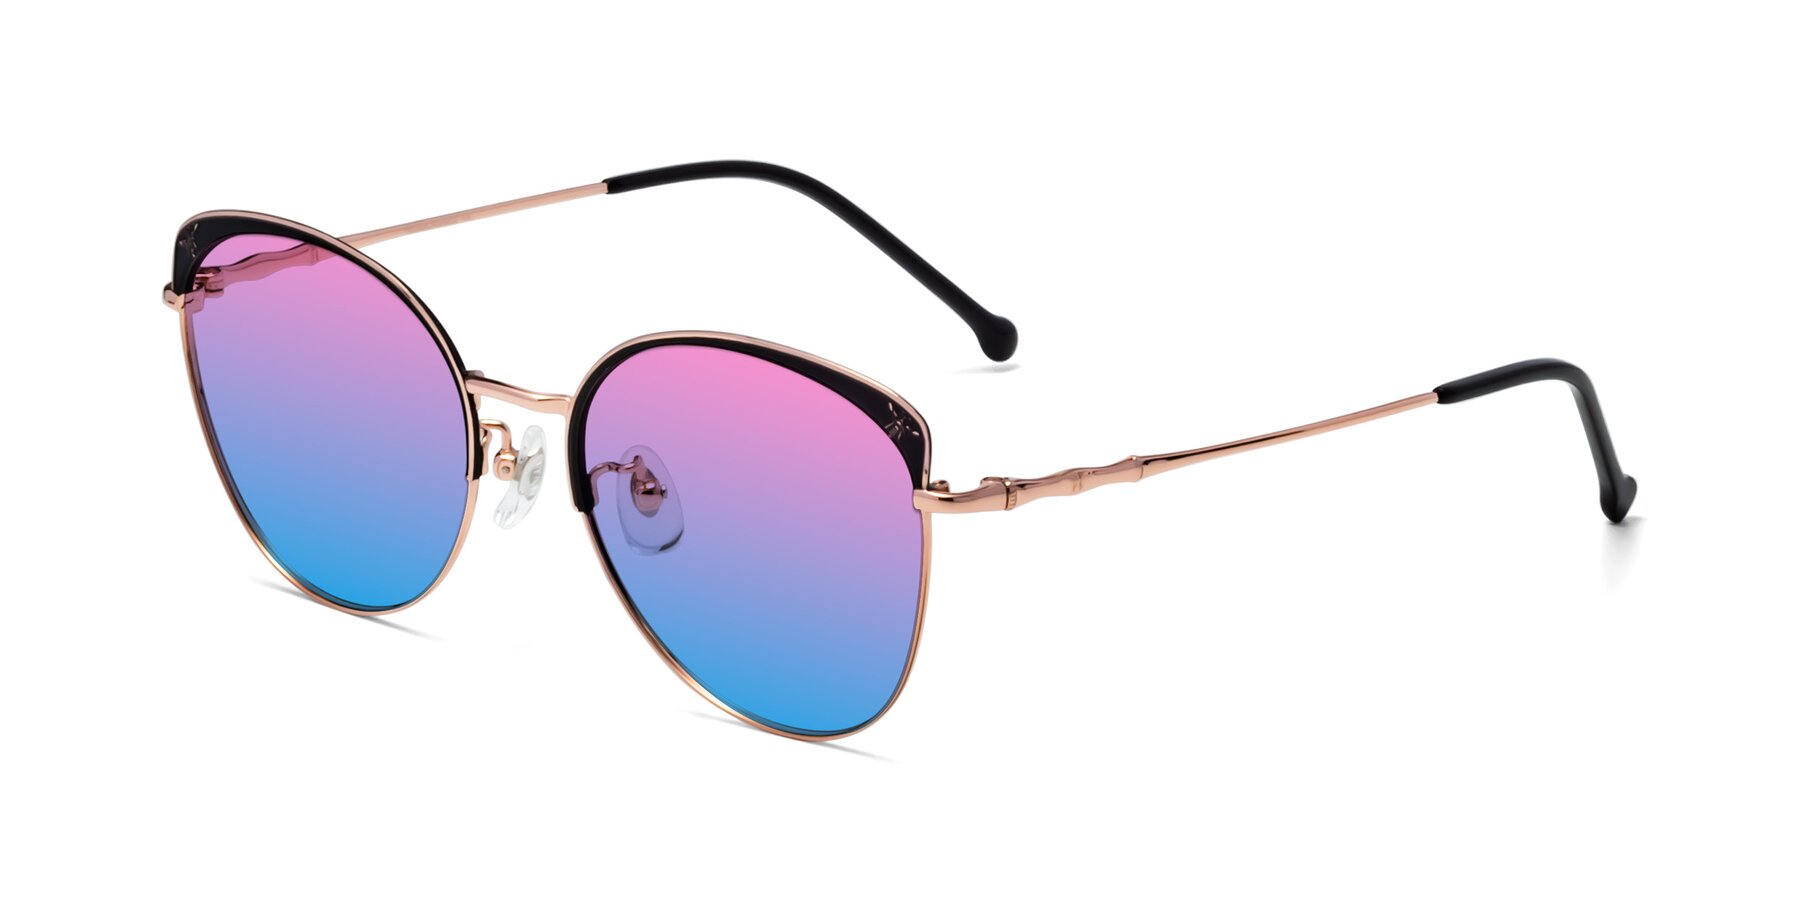 Angle of 18019 in Black-Rose Gold with Pink / Blue Gradient Lenses